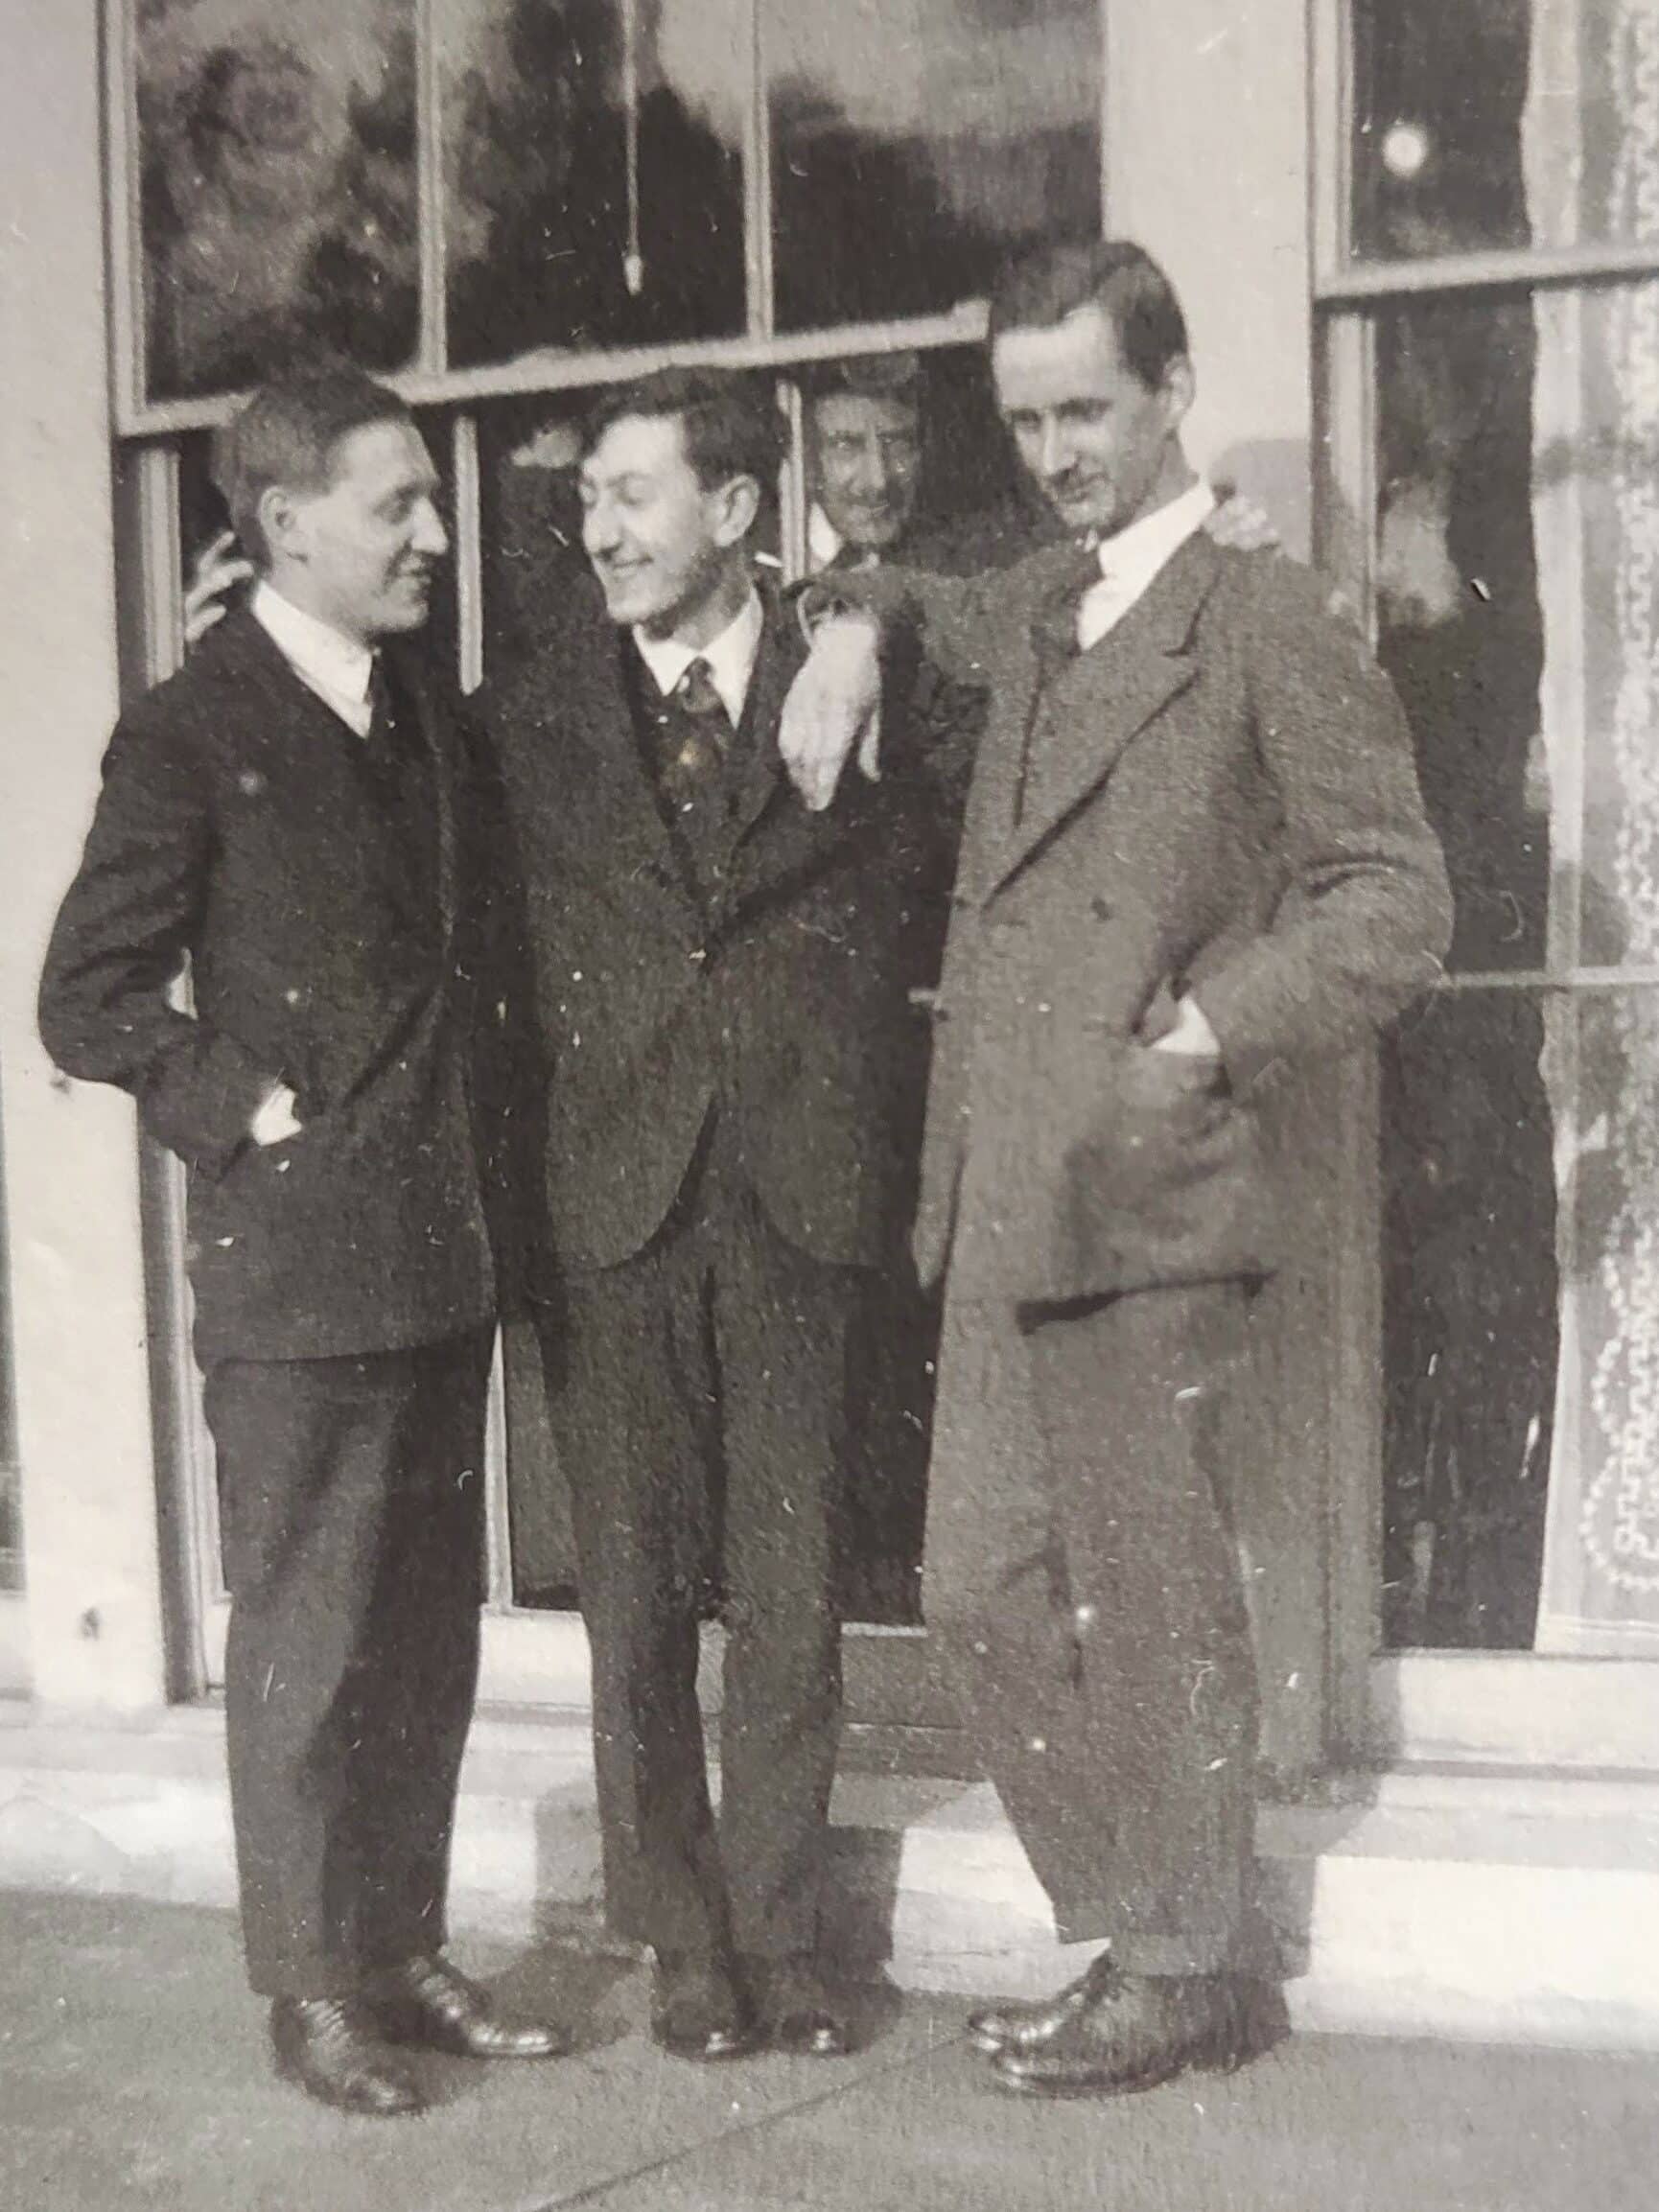 A 1927 photograph taken at Beaussiet, the main residence of the music patrons Jaap and Louise de Graaff-Bachiene: left to right, Zoltán Székely, Pál Hermann and the violinist László Szentgyörgyi*